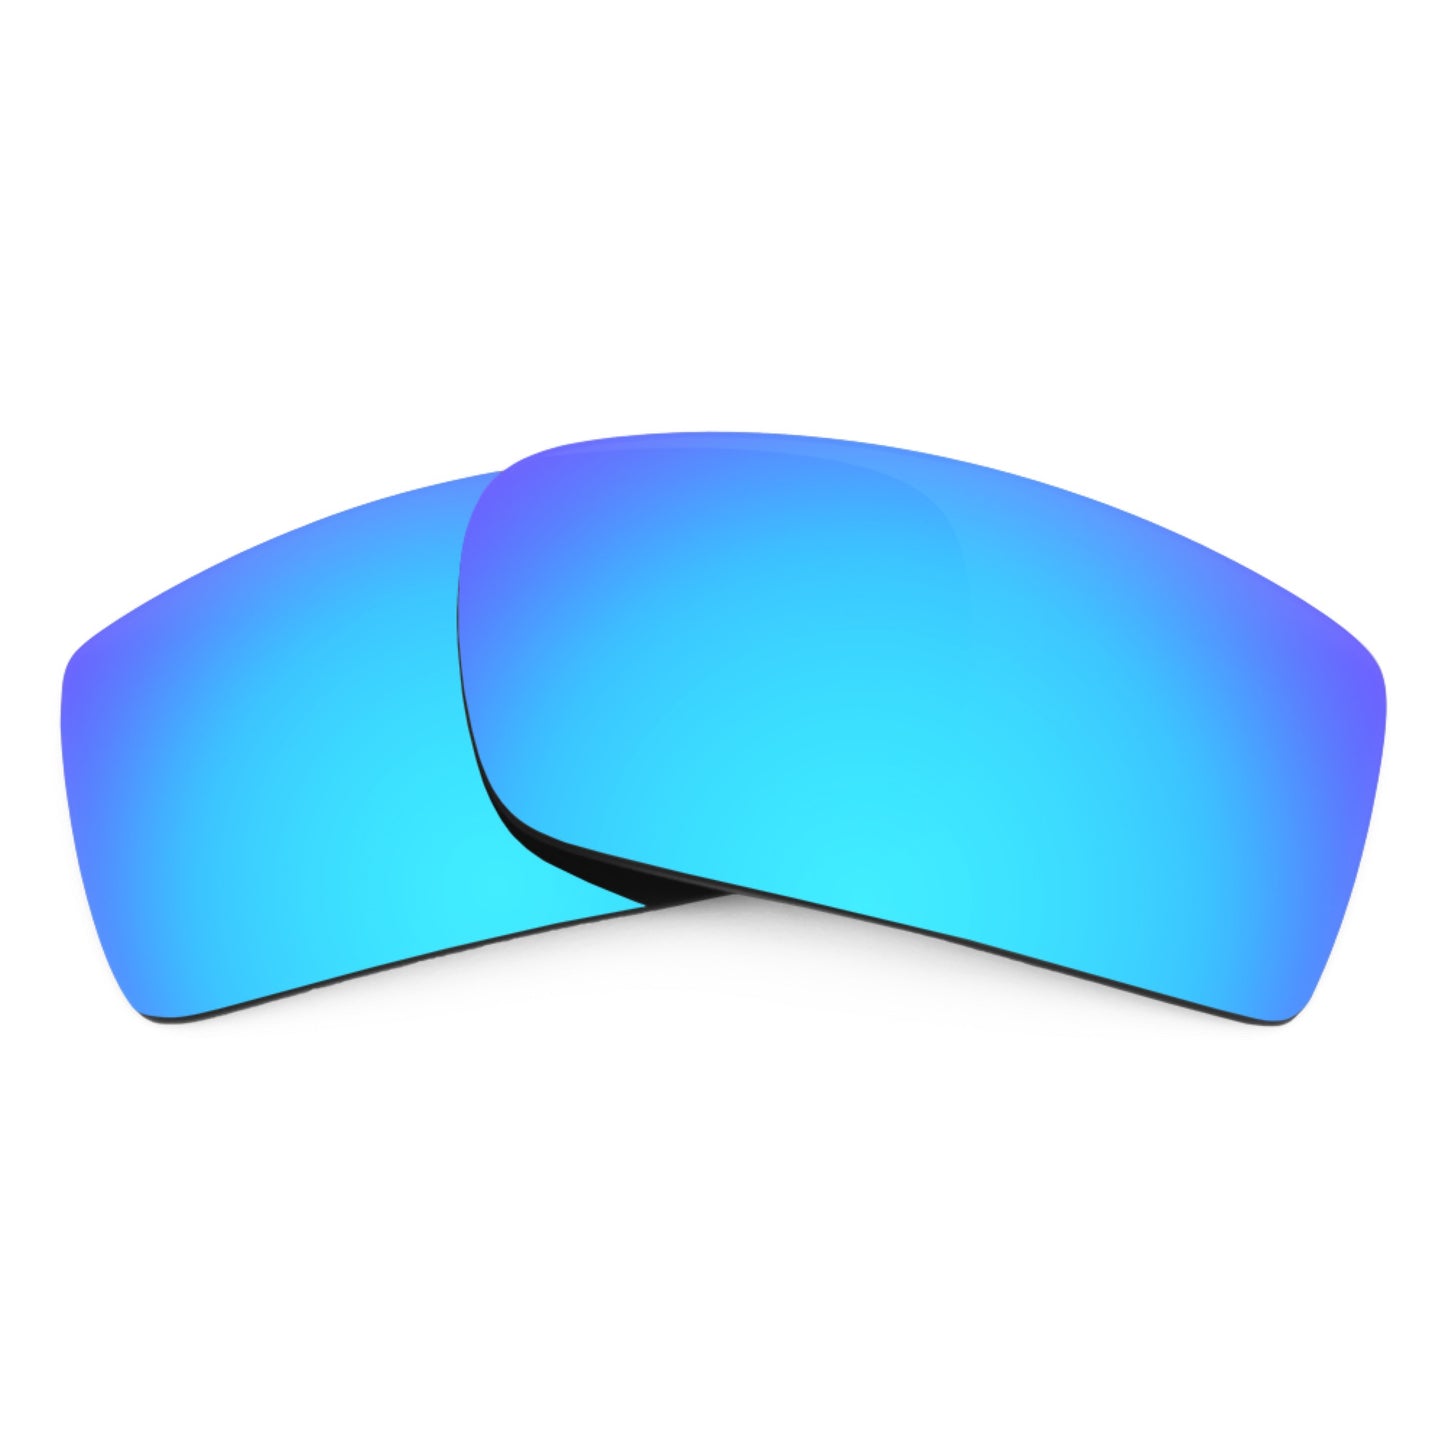 Revant replacement lenses for Ray-Ban RB4110 64mm Non-Polarized Ice Blue